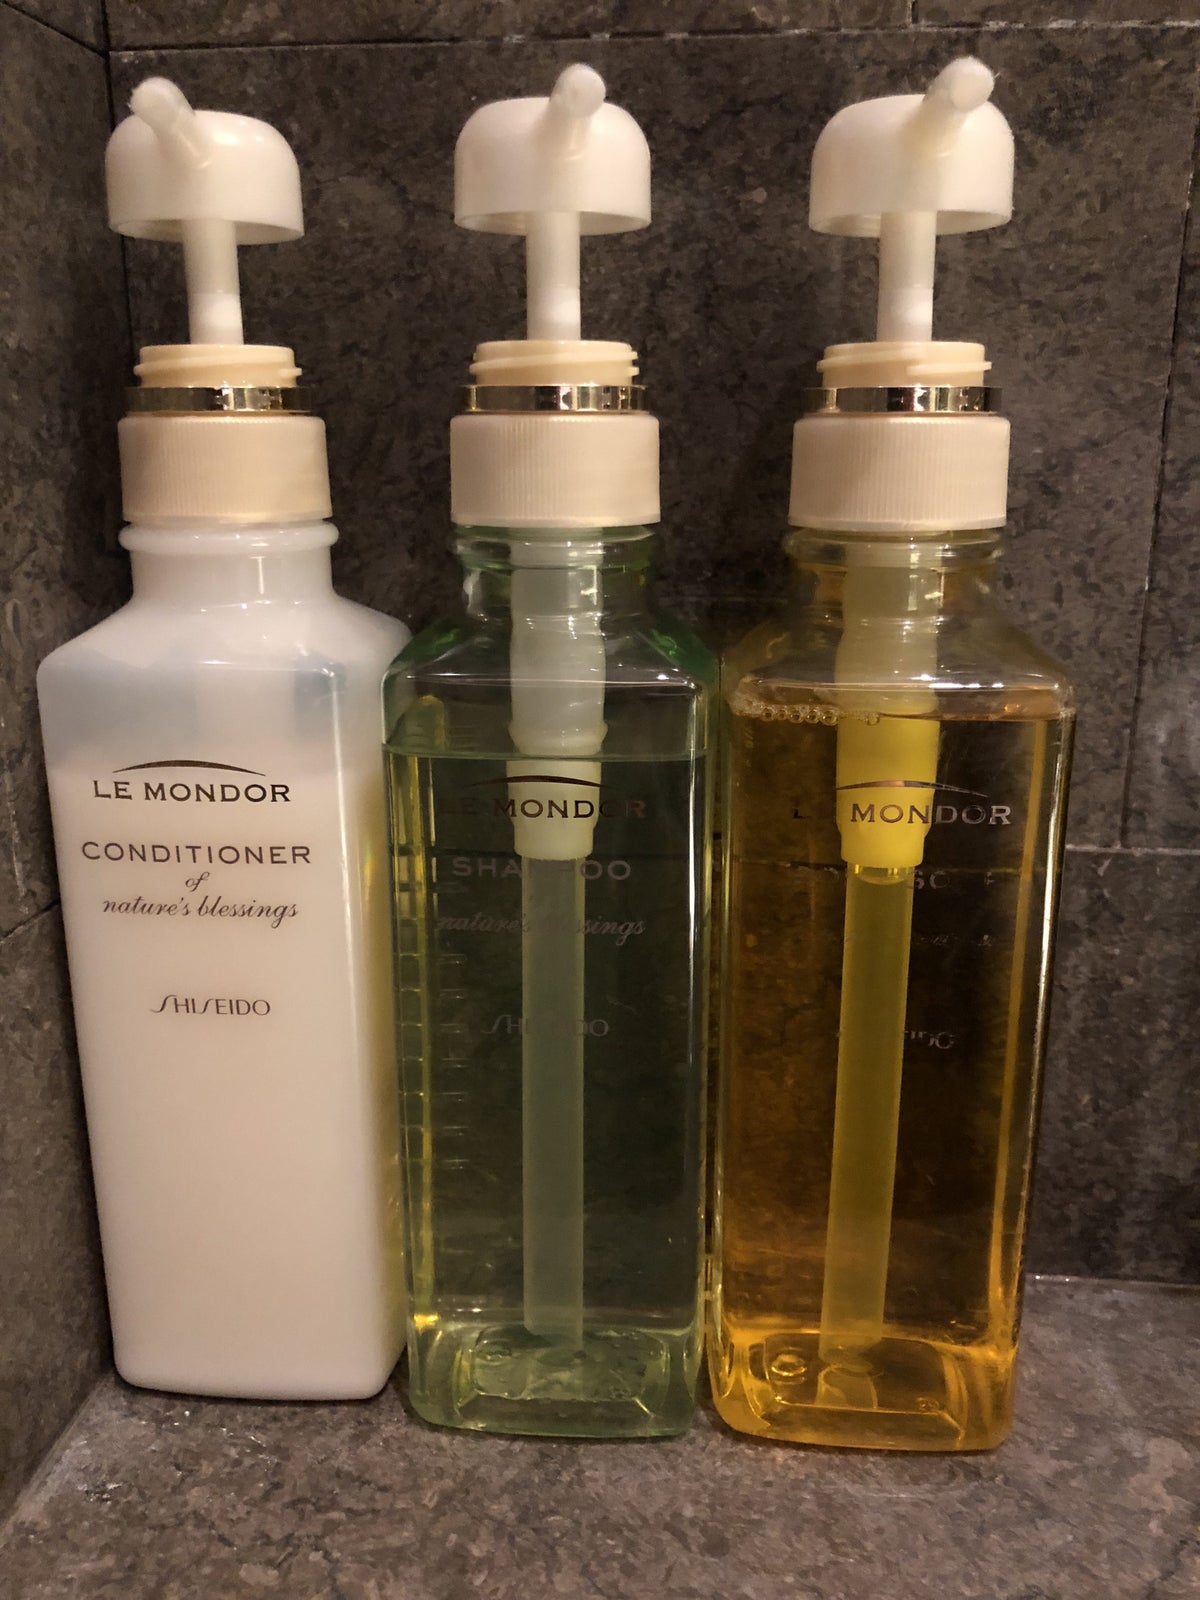 Shiseido Amenities in Japan Airlines First Class Lounge